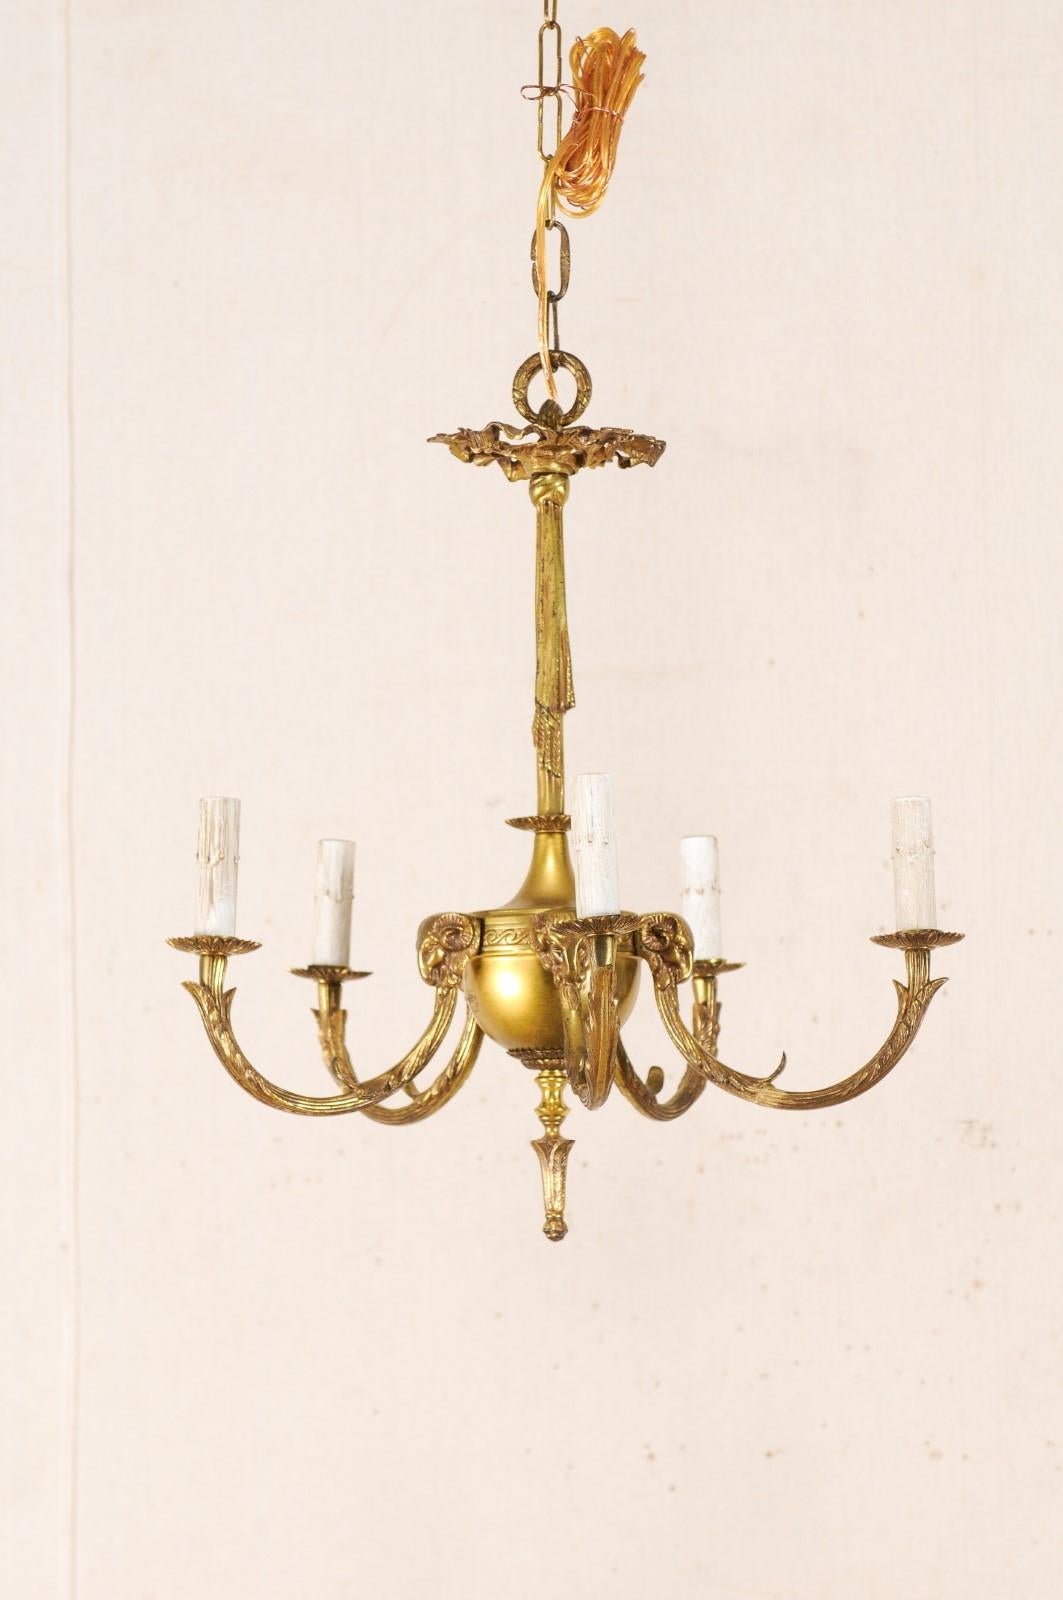 A French brass five-light chandelier from the mid-20th century. This vintage hanging light from France is adorned with rich foliage accents and ram's head motif. Five rams's heads top the light arms which extend outward in a C-shaped swag, each